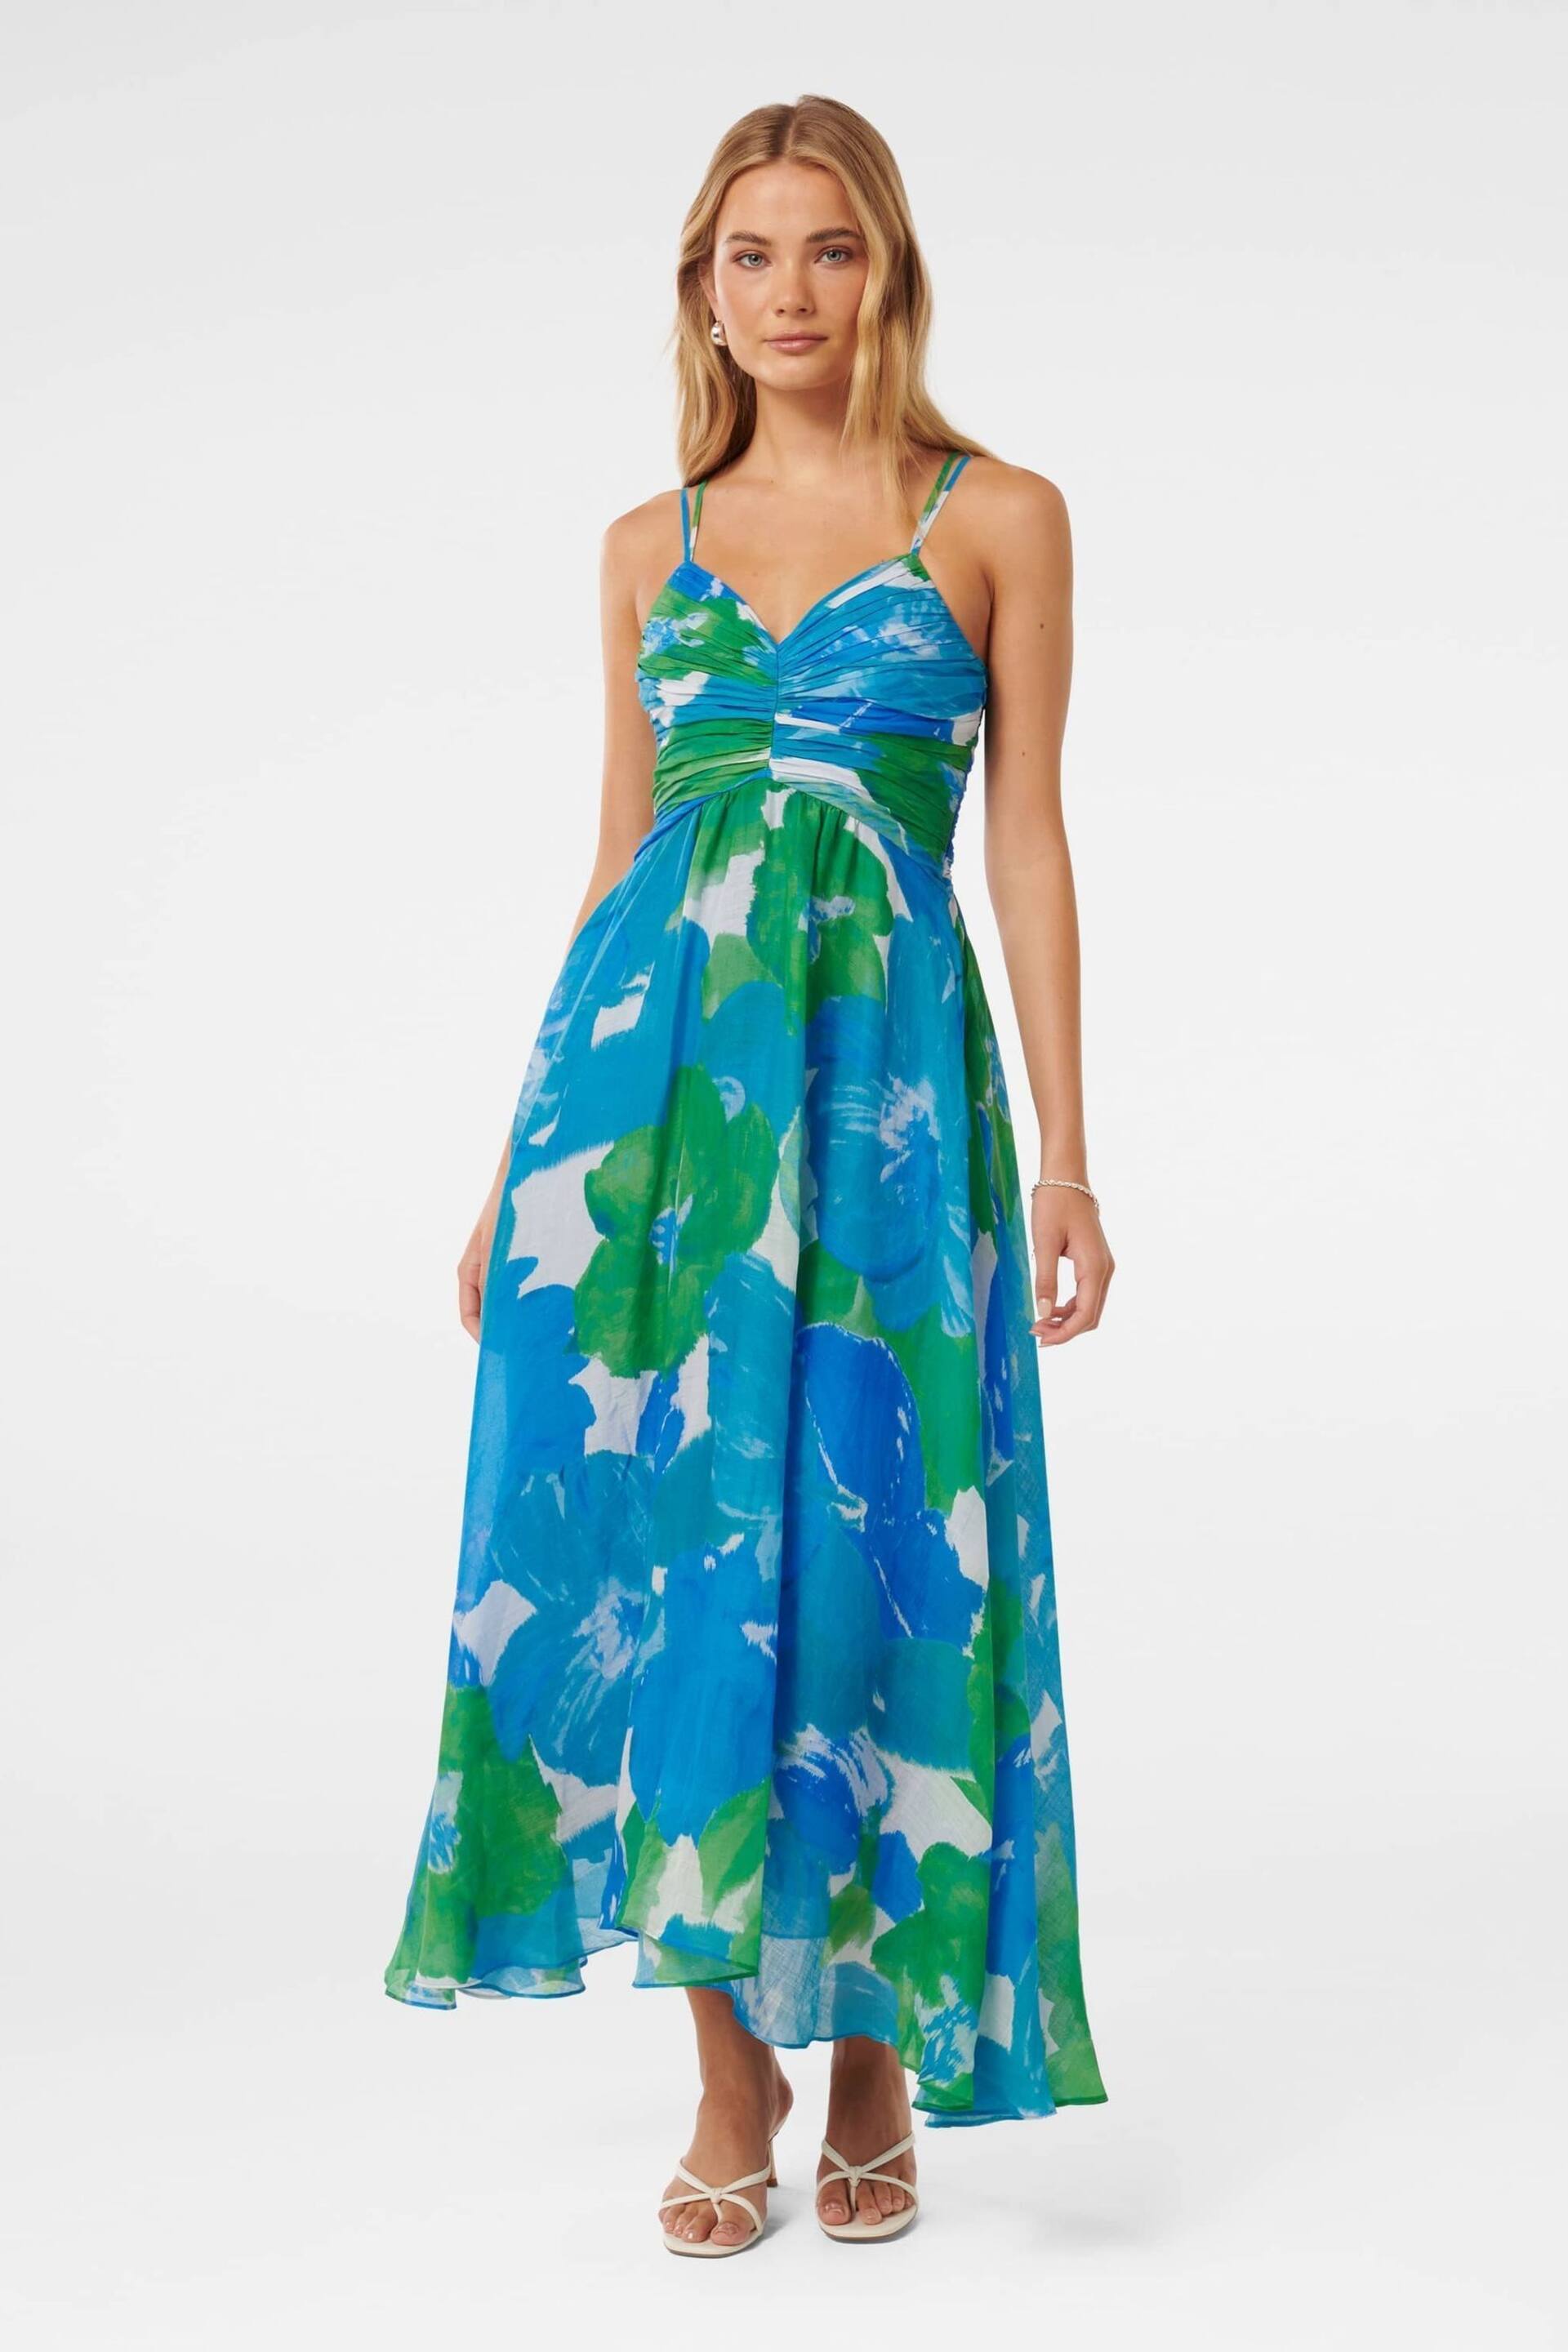 Forever New Blue Jolie Strappy Ruched Bodice Maxi Dress - Image 1 of 4